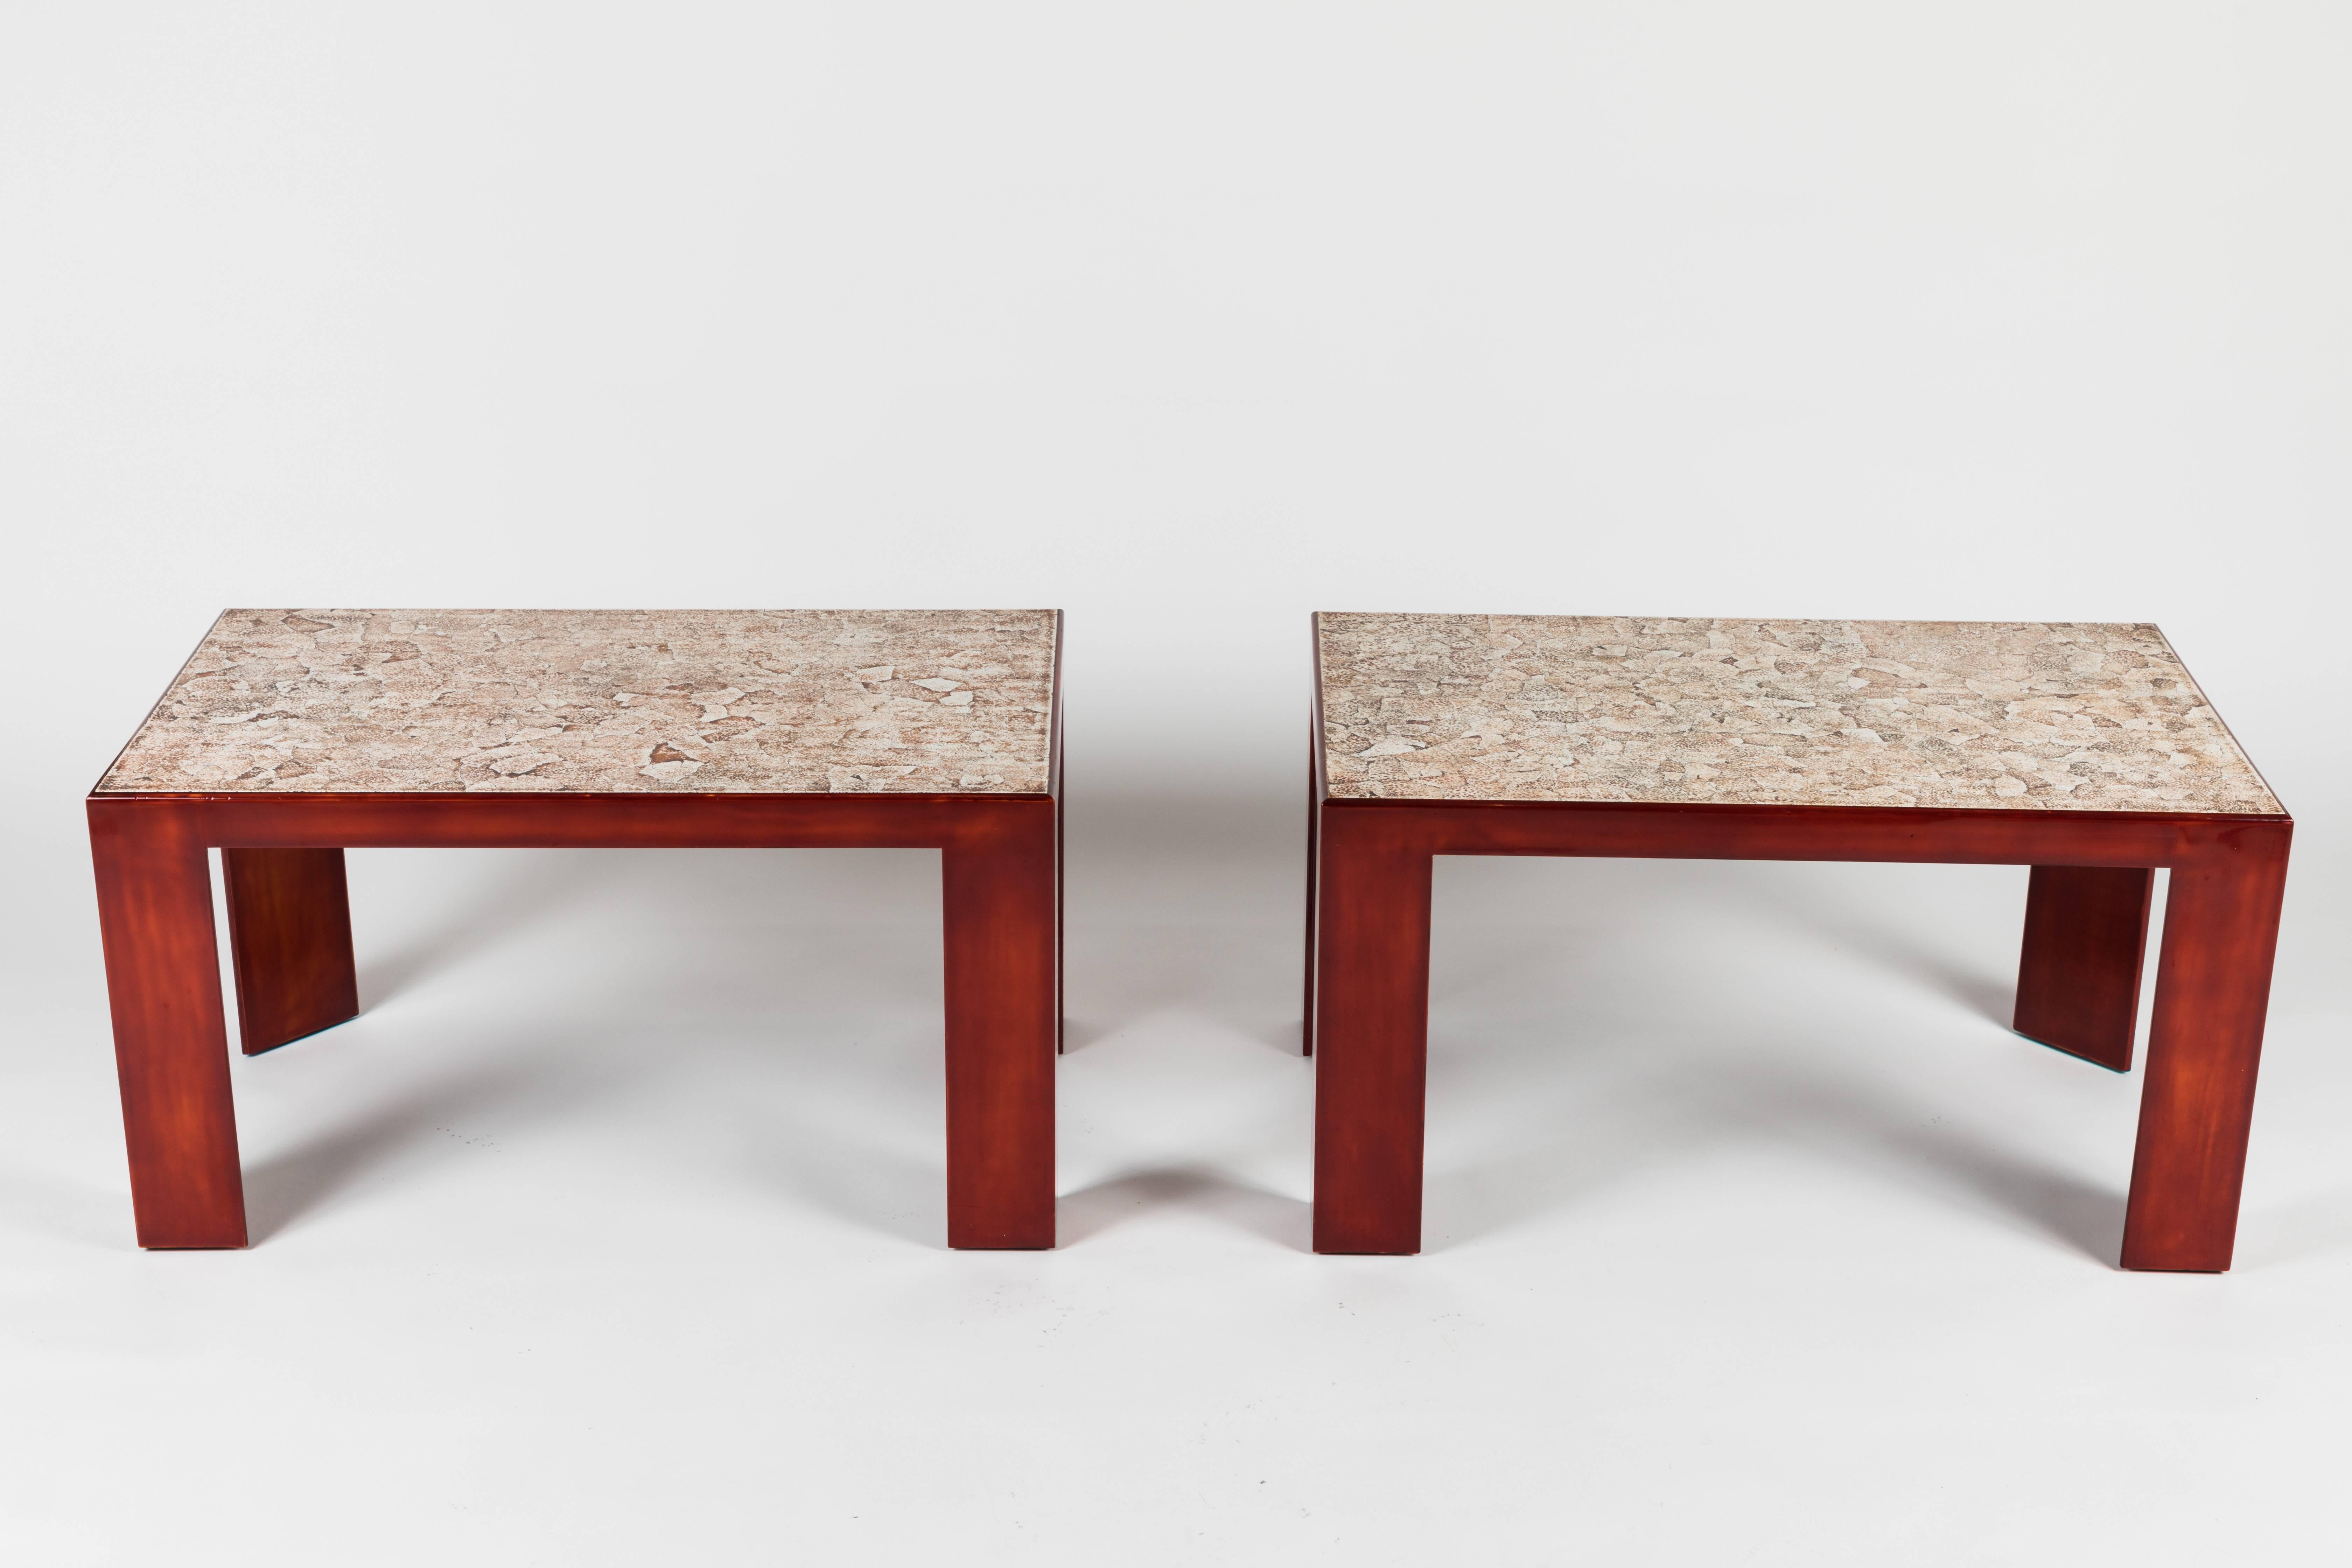 Beautiful pair of Parsons-style side tables In the Art Deco style with a beautiful Cinnabar lacquer finish.  The tops of the tables feature Eggshell lacquer.  These tables are stamped to the underside “Decorative Arts Studio 92 Moss”.